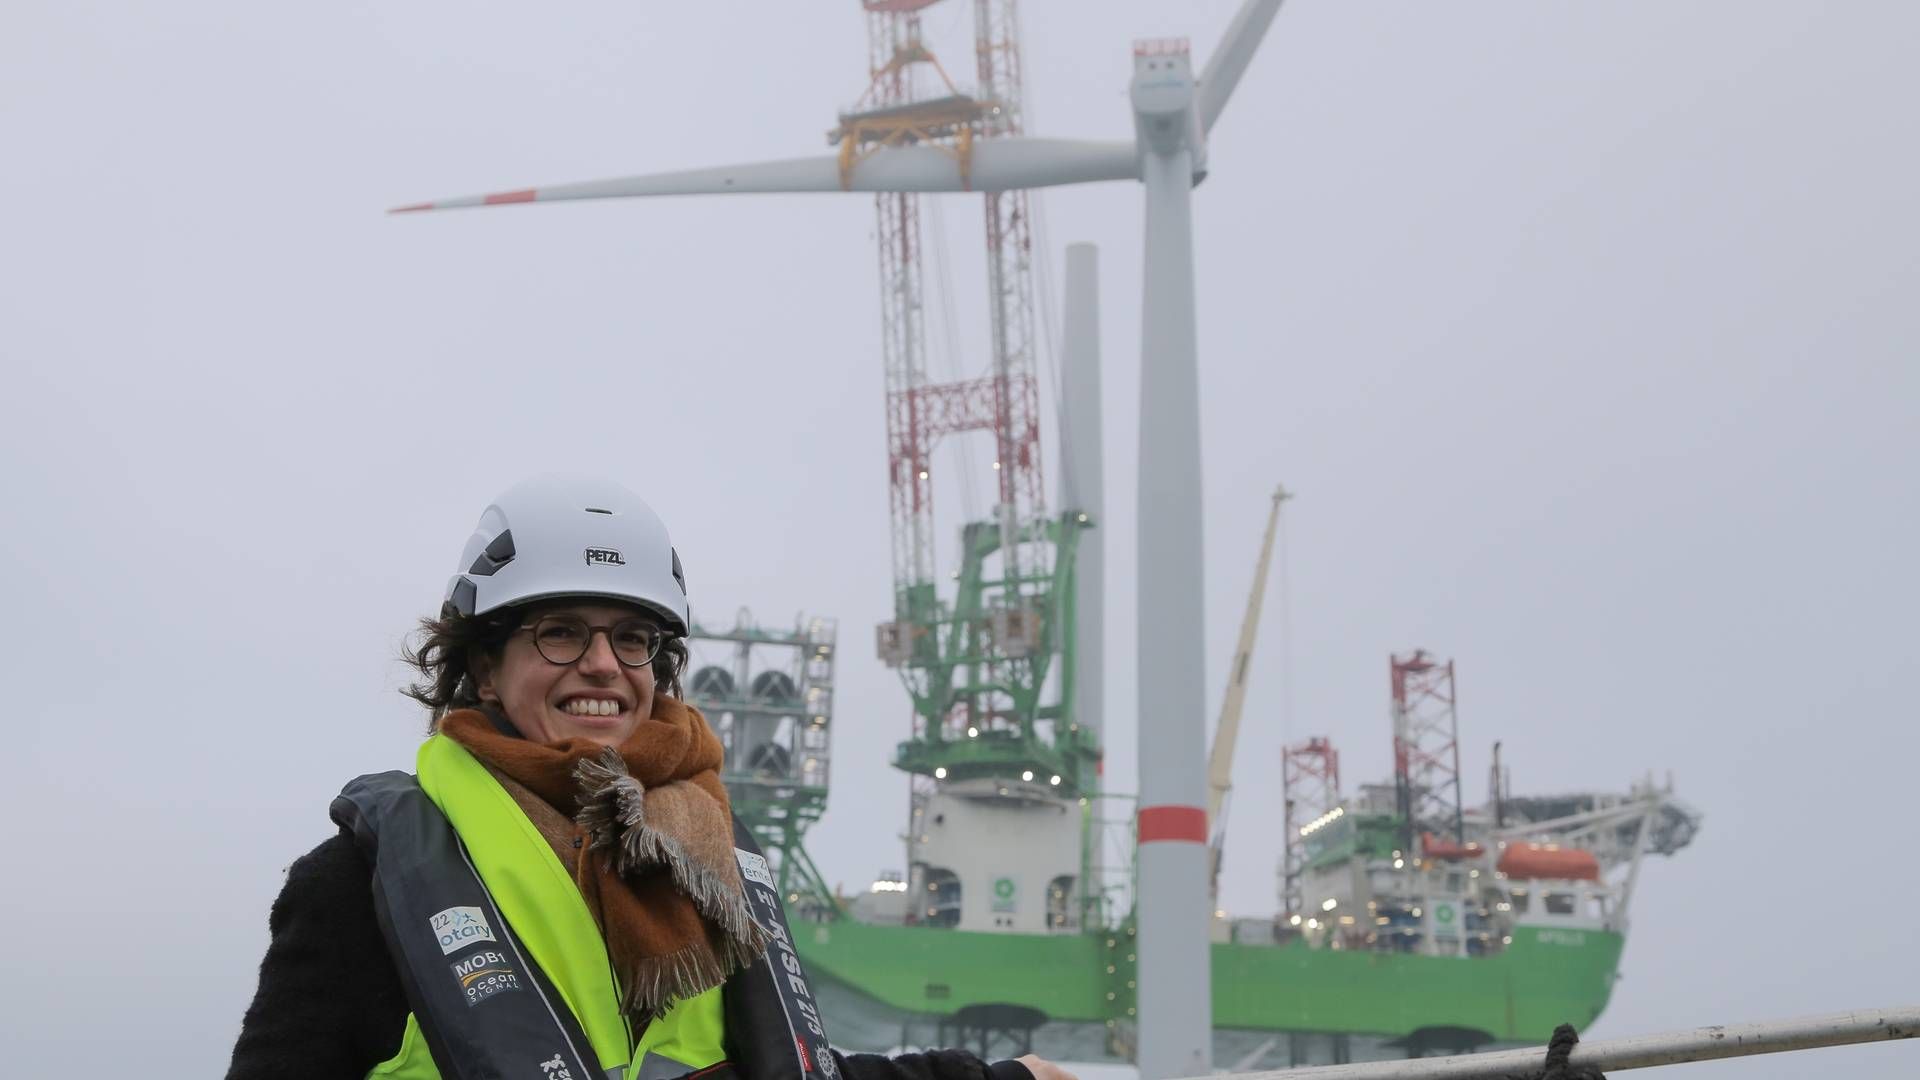 Shortly before becoming energy minister, Tinne Van der Straten partook in the inauguration of offshore wind farm Seamade. | Photo: Ministre fédéral de l'Energie